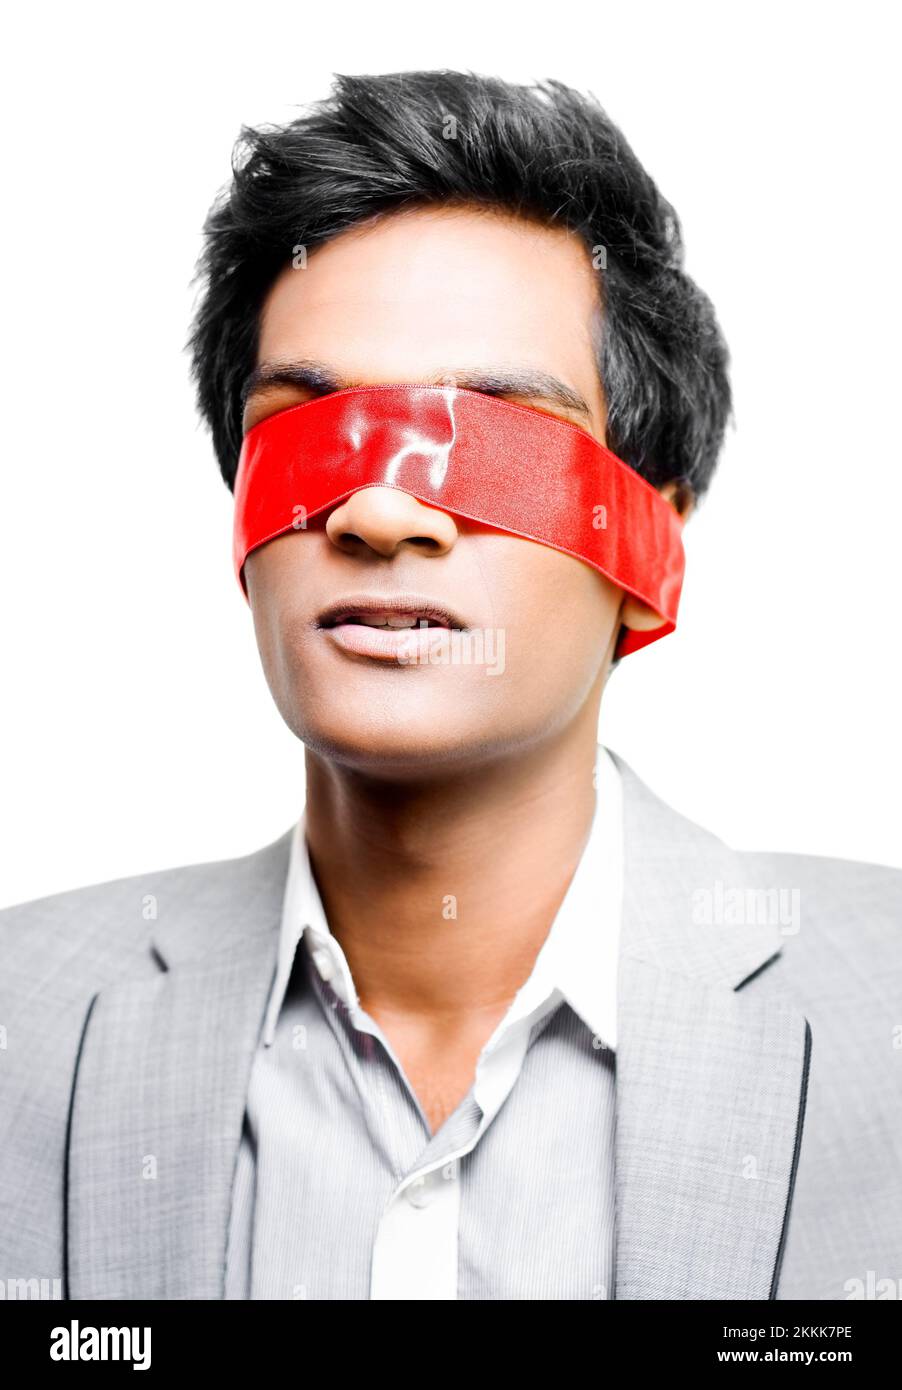 A young Asian business man has his eyes taped shut with a band of red tape conceptual of either Blinded by red tape due to unnecessary bureacracy or H Stock Photo